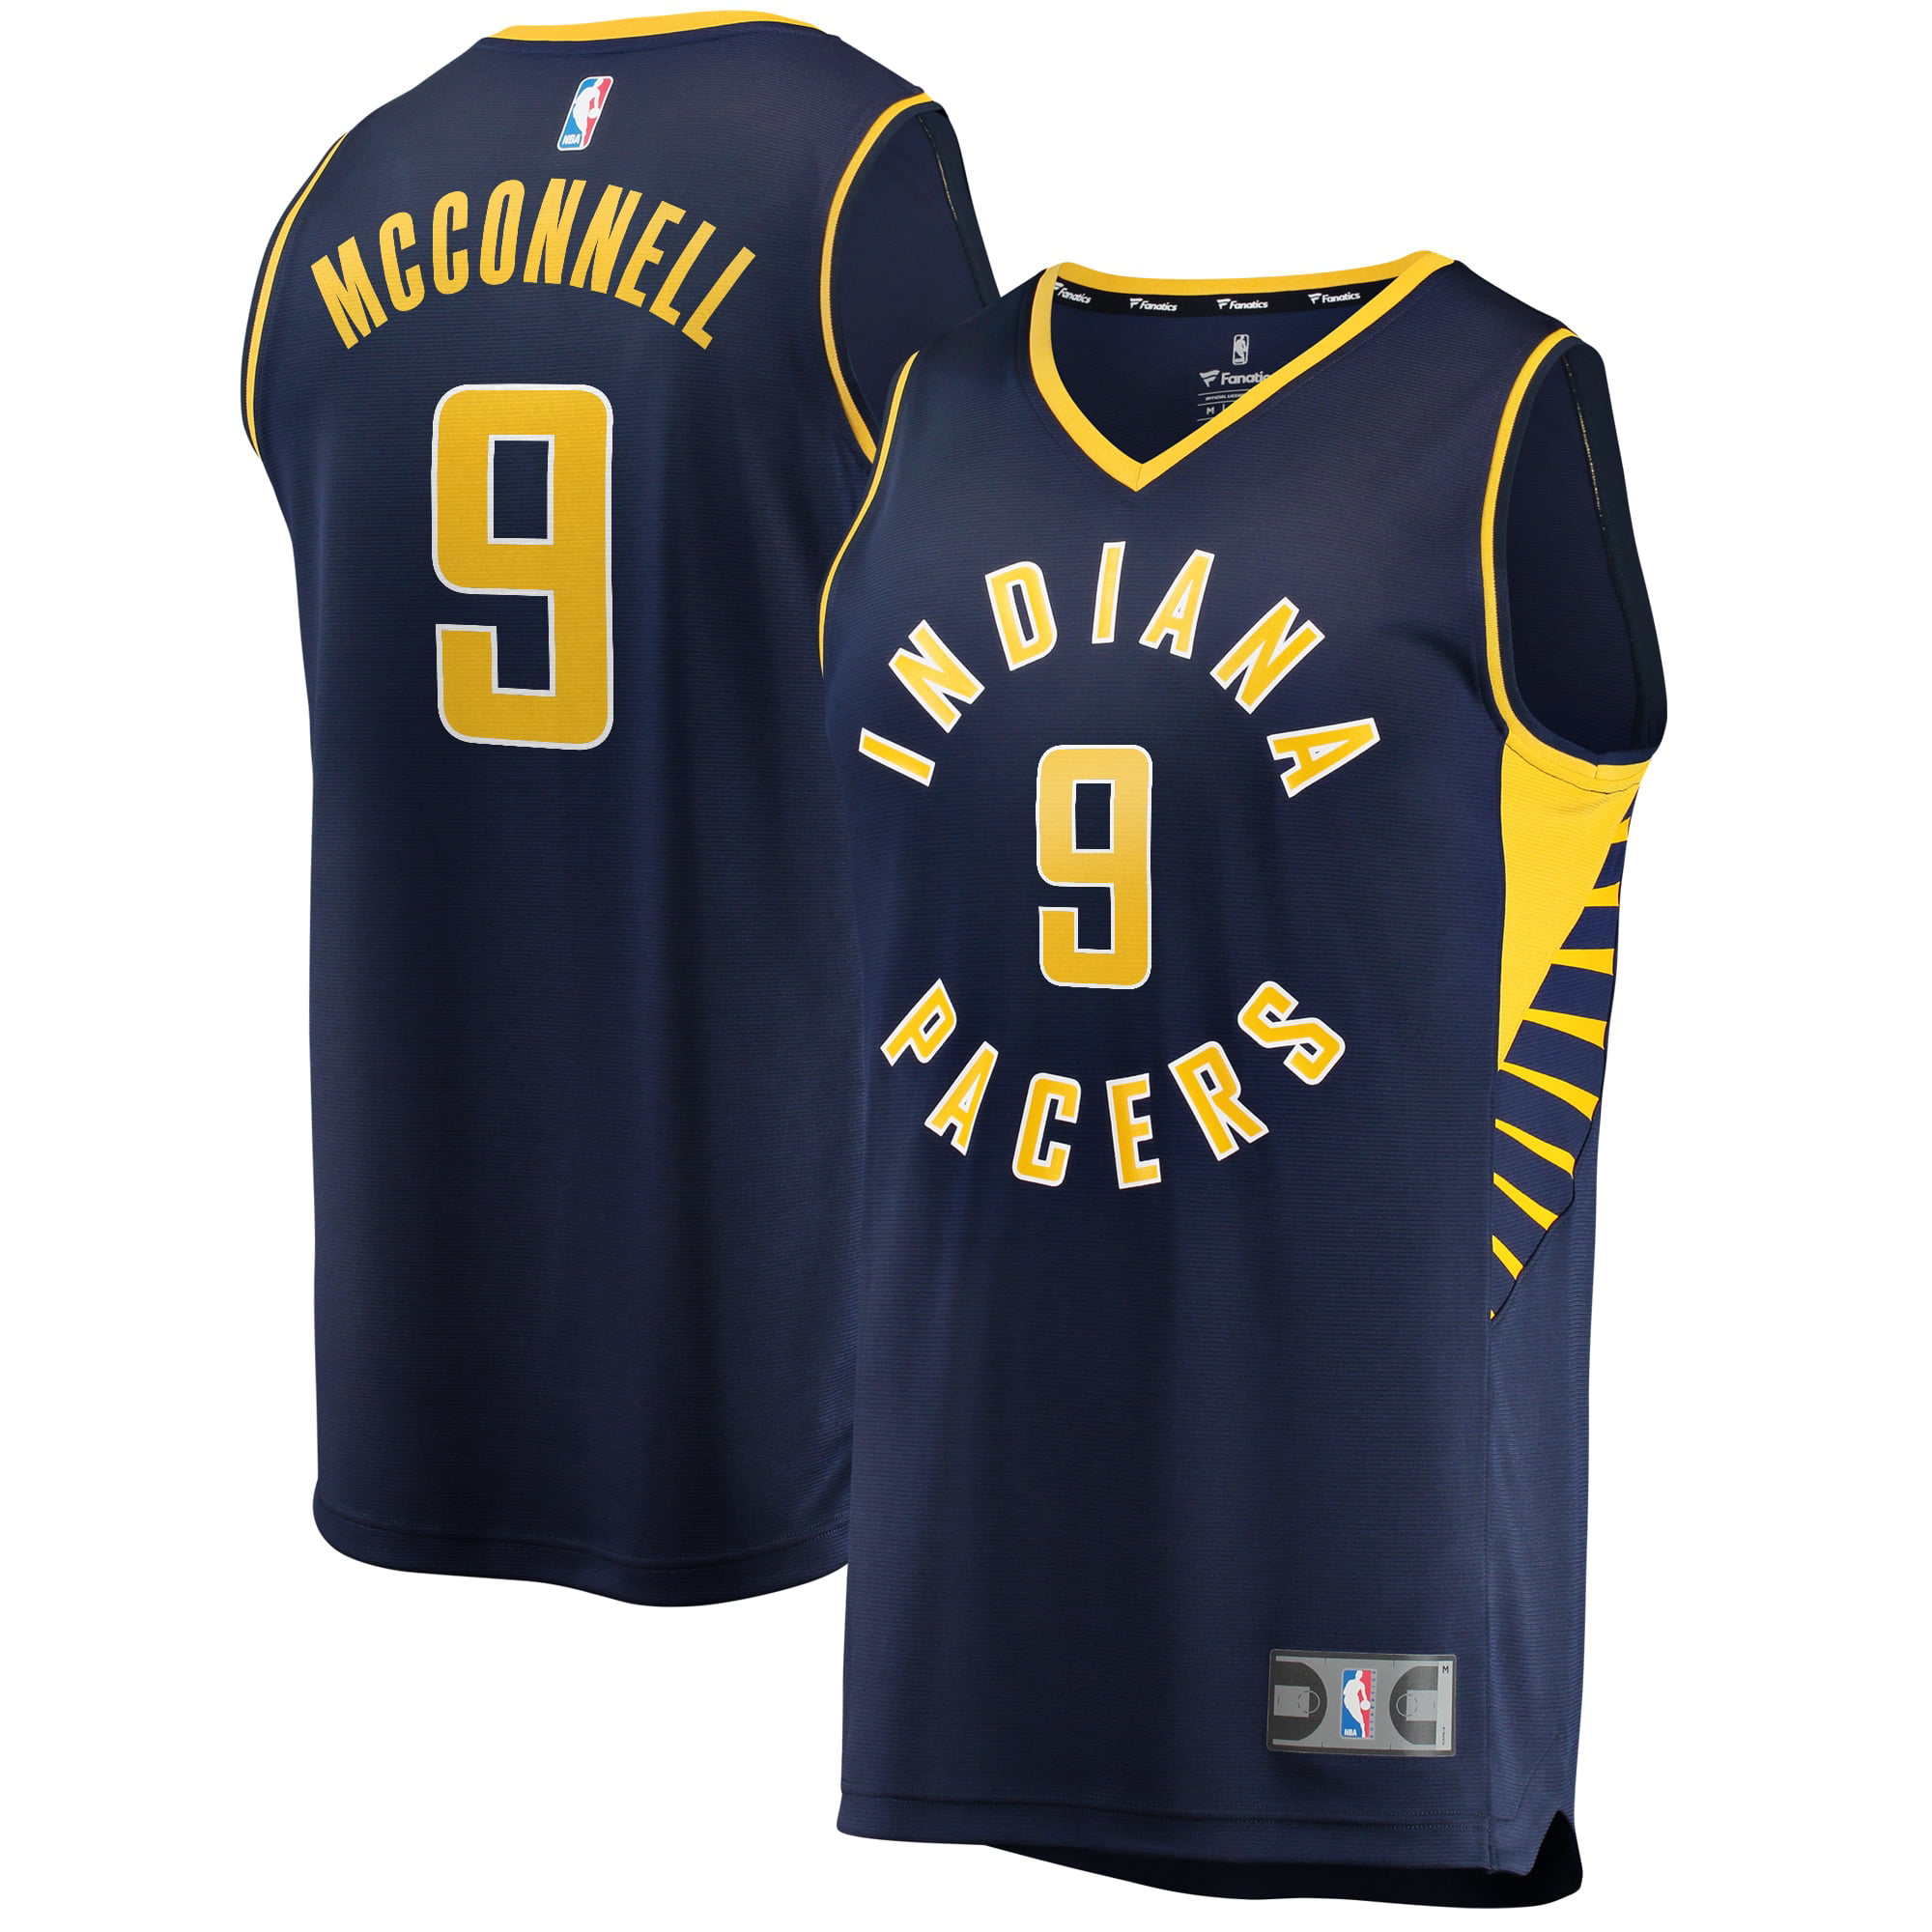 tj mcconnell city edition jersey